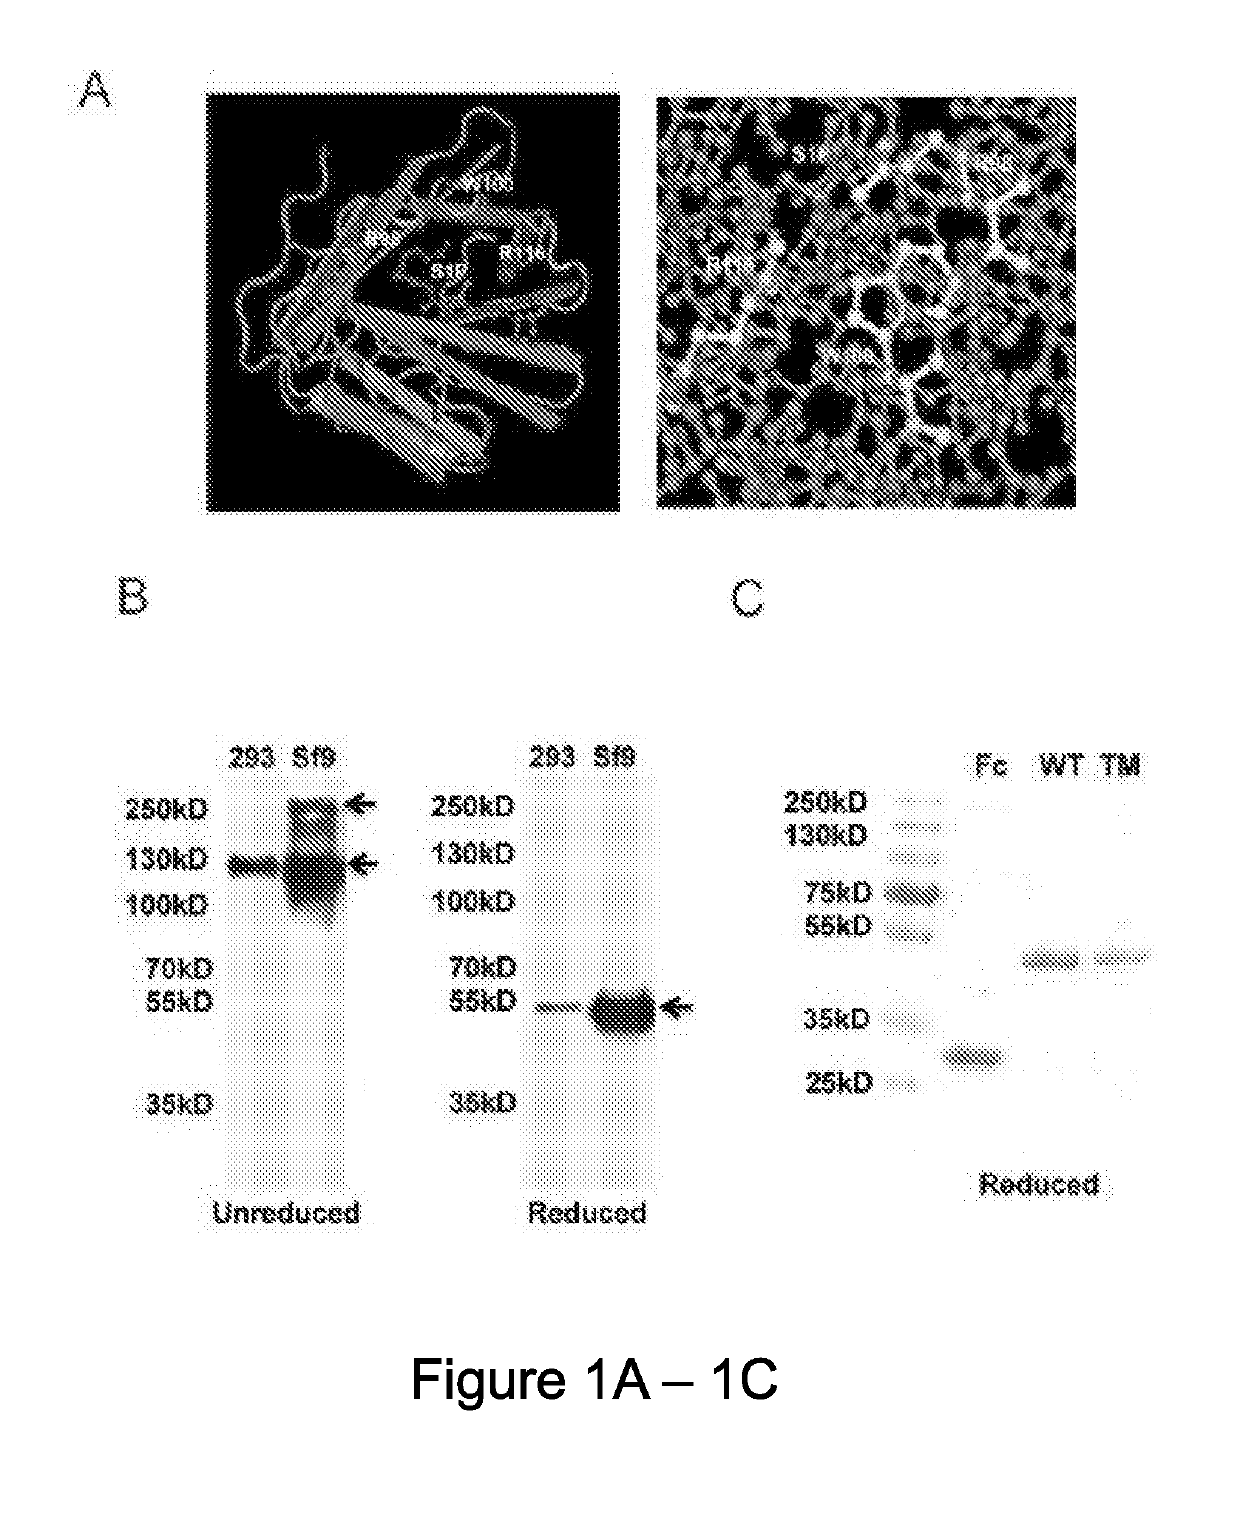 Apom-fc fusion proteins, complexes thereof with sphingosine 1-phosphate (S1P), and methods for treating vascular and non-vascular diseases